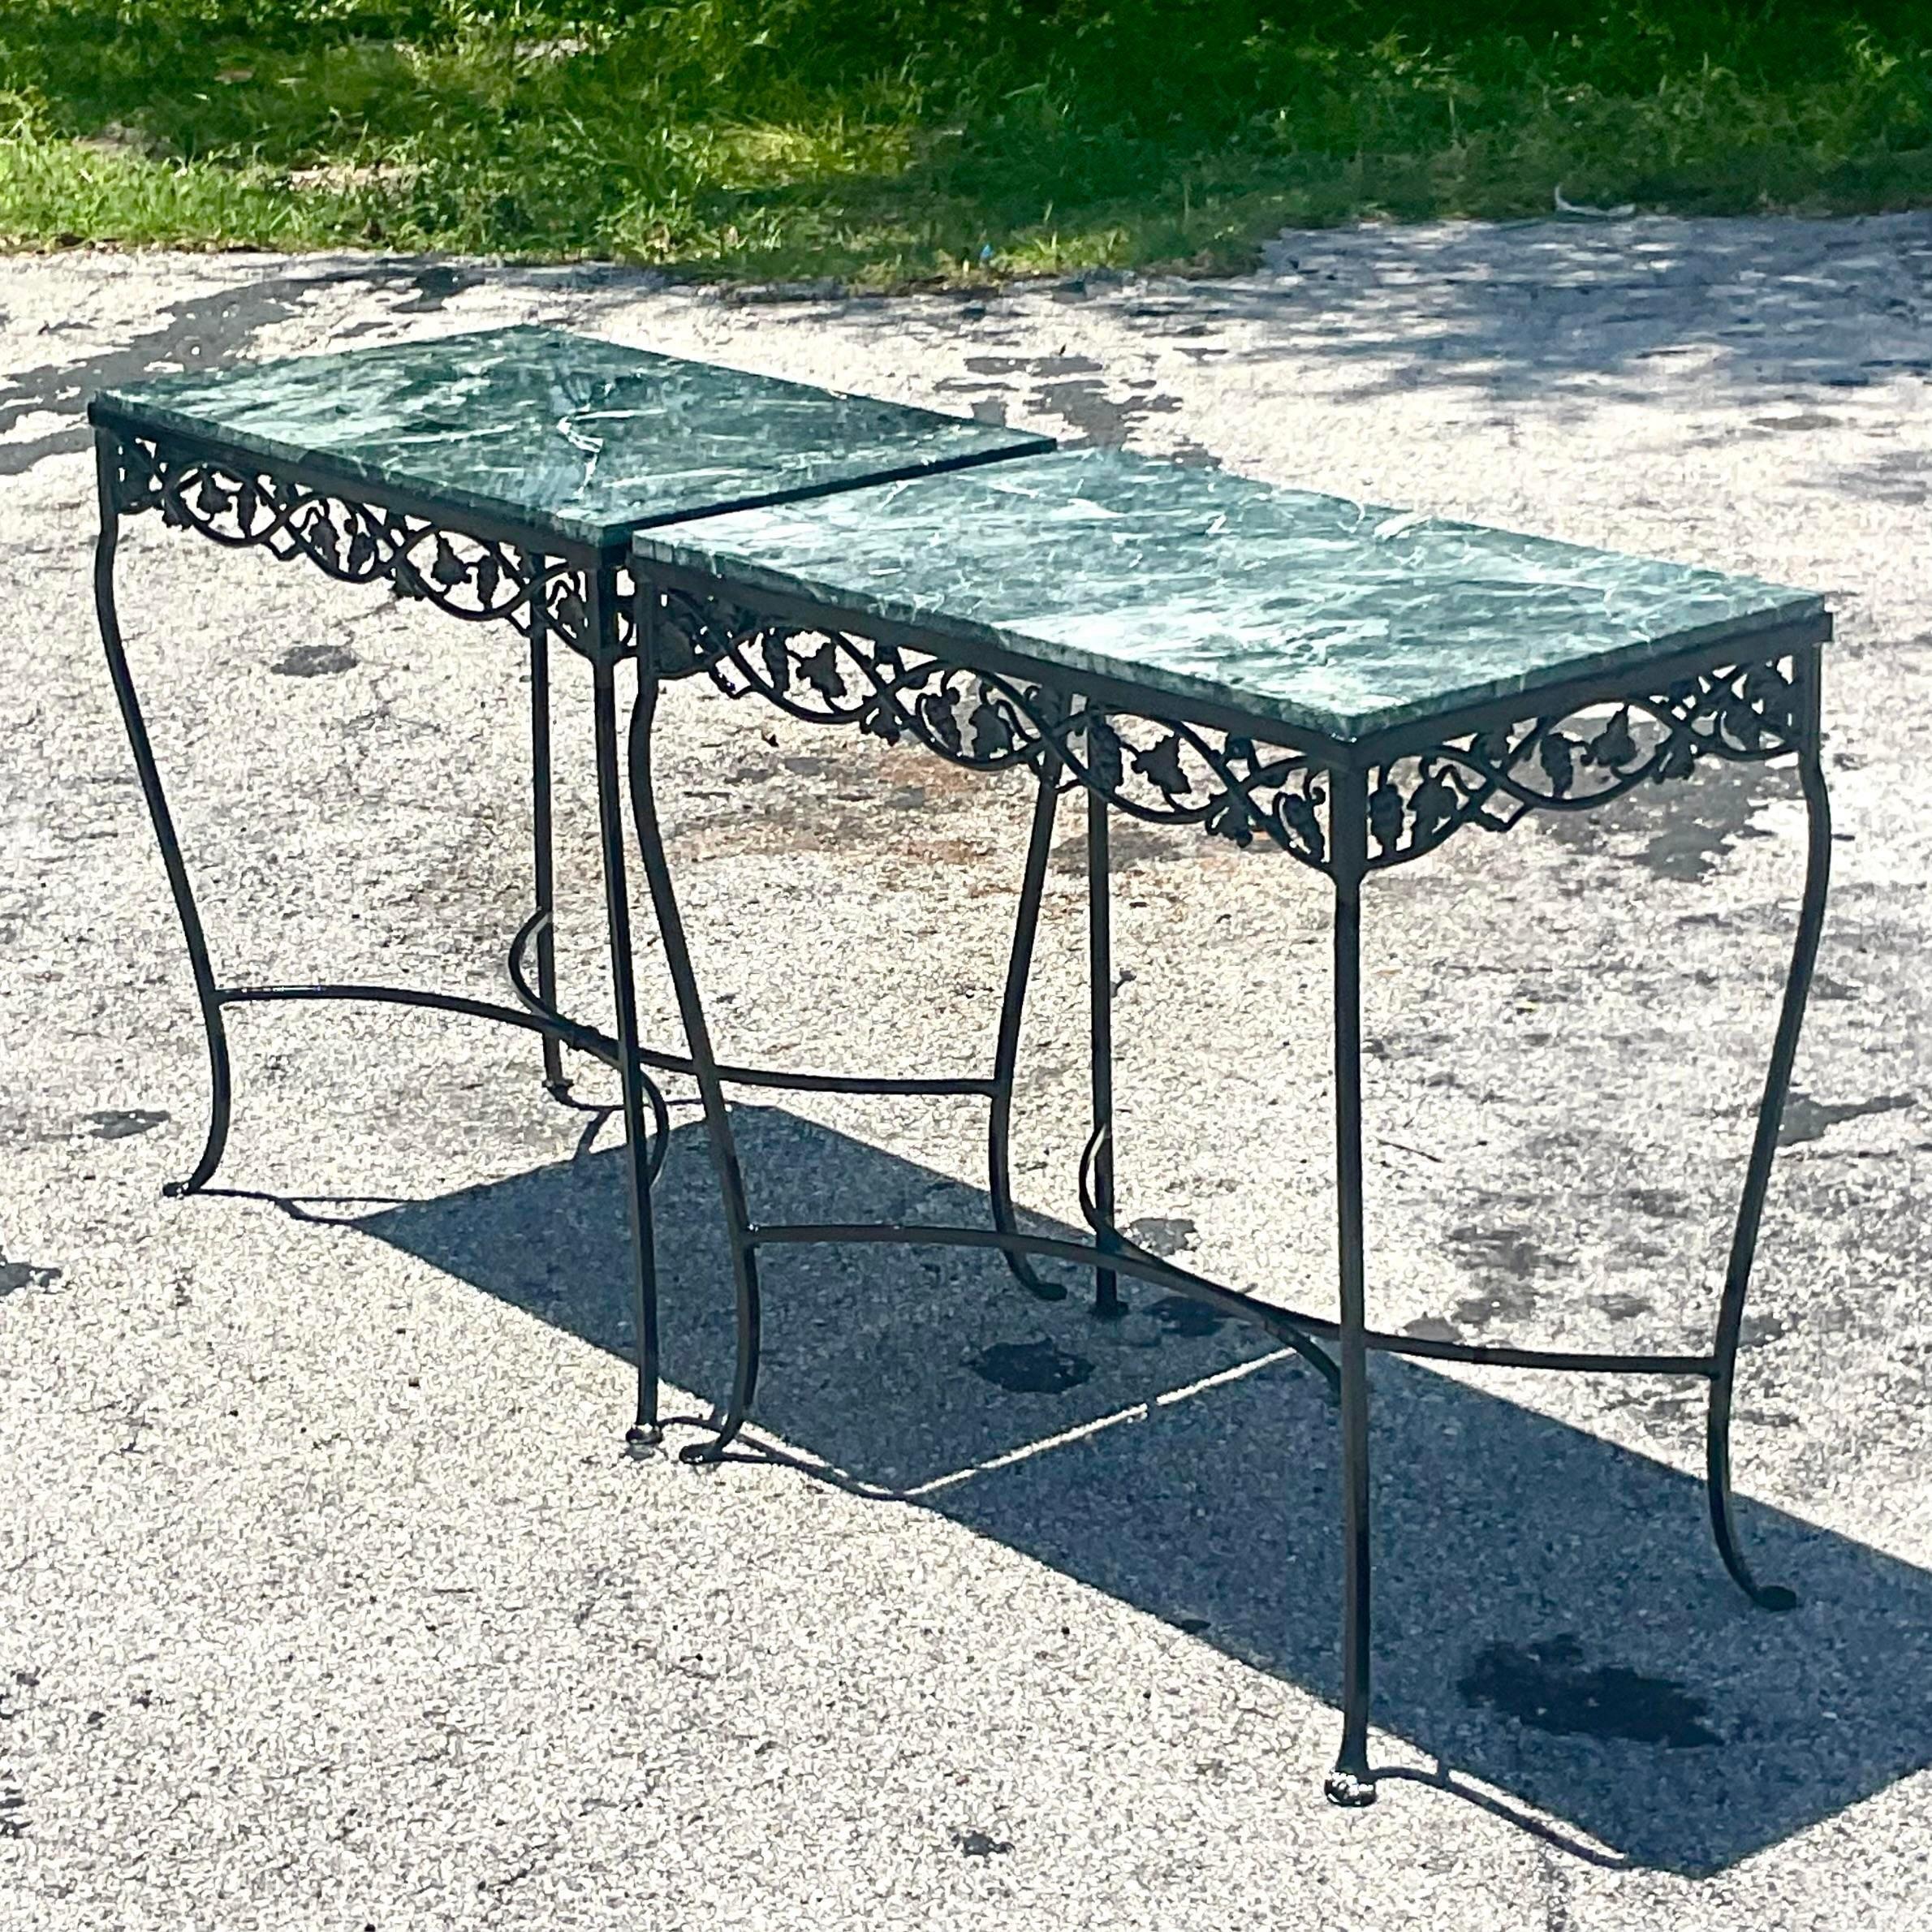 A stunning pair of vintage Regency outdoor console tables. Beautiful floral wrought iron with inset green marble tops. Recently powder-coated in gloss black. Acquired from a Palm Beach estate.